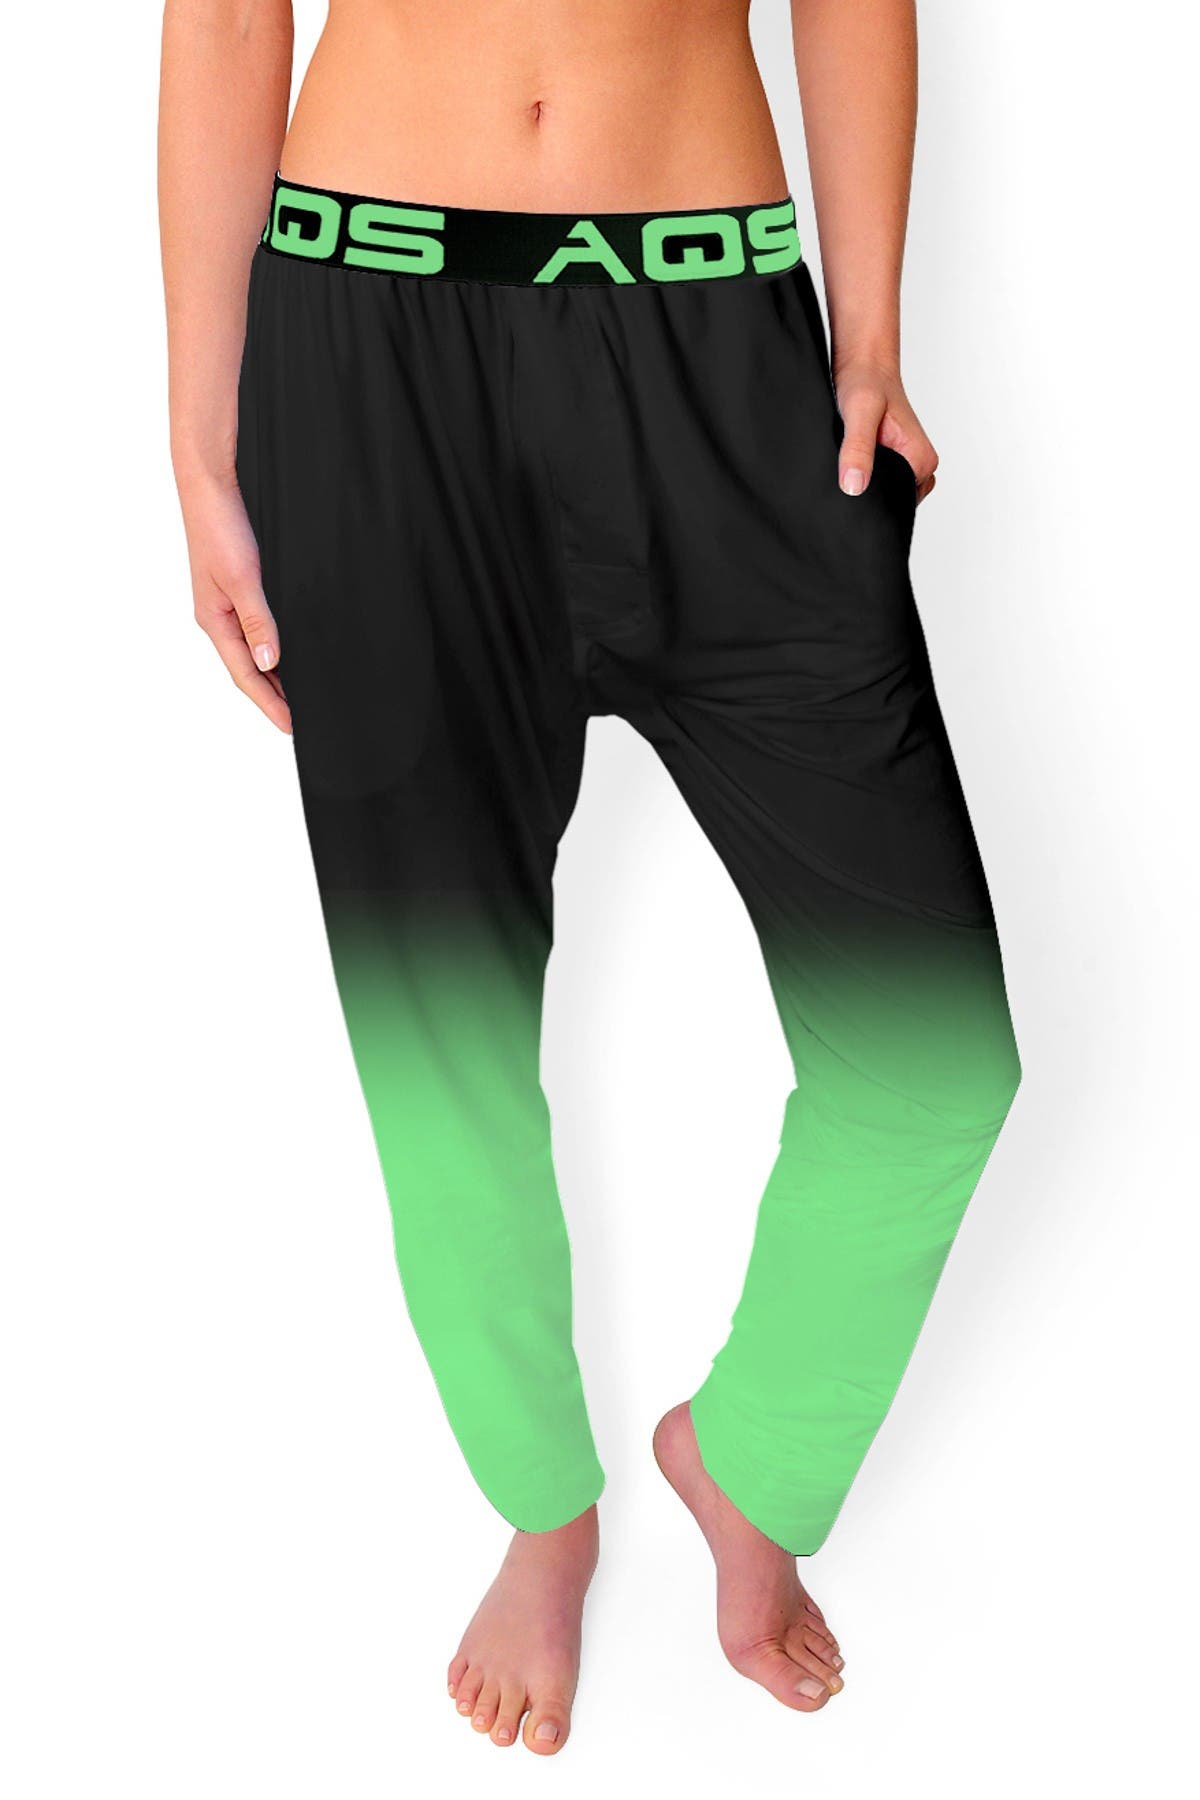 Aqs Ombre Lounge Pants In Black/mint Ombre